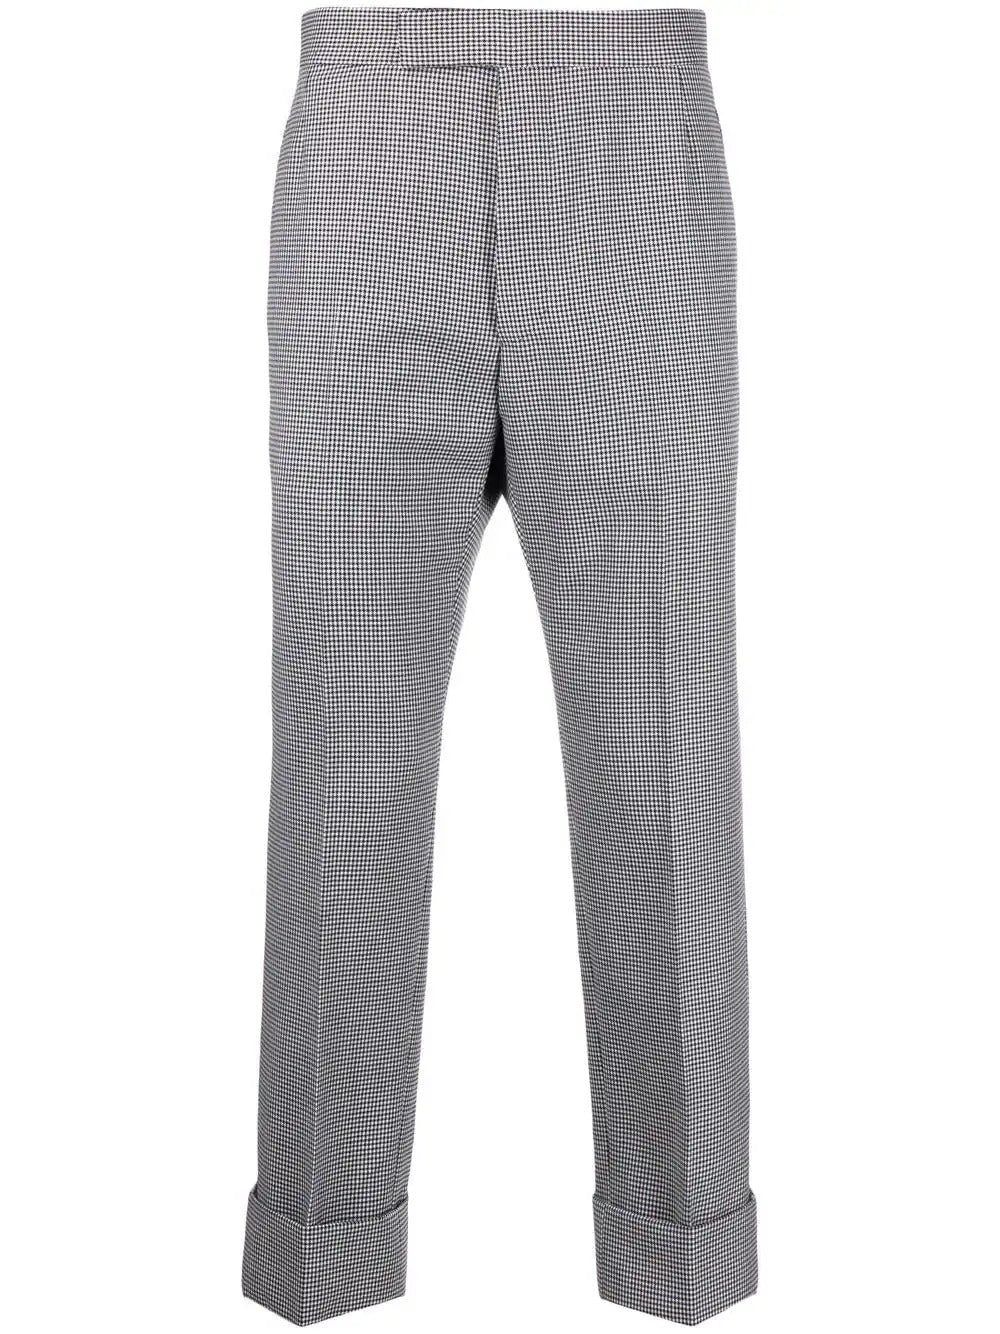 Thom Browne Houndstooth Backstrap Trousers Black 1